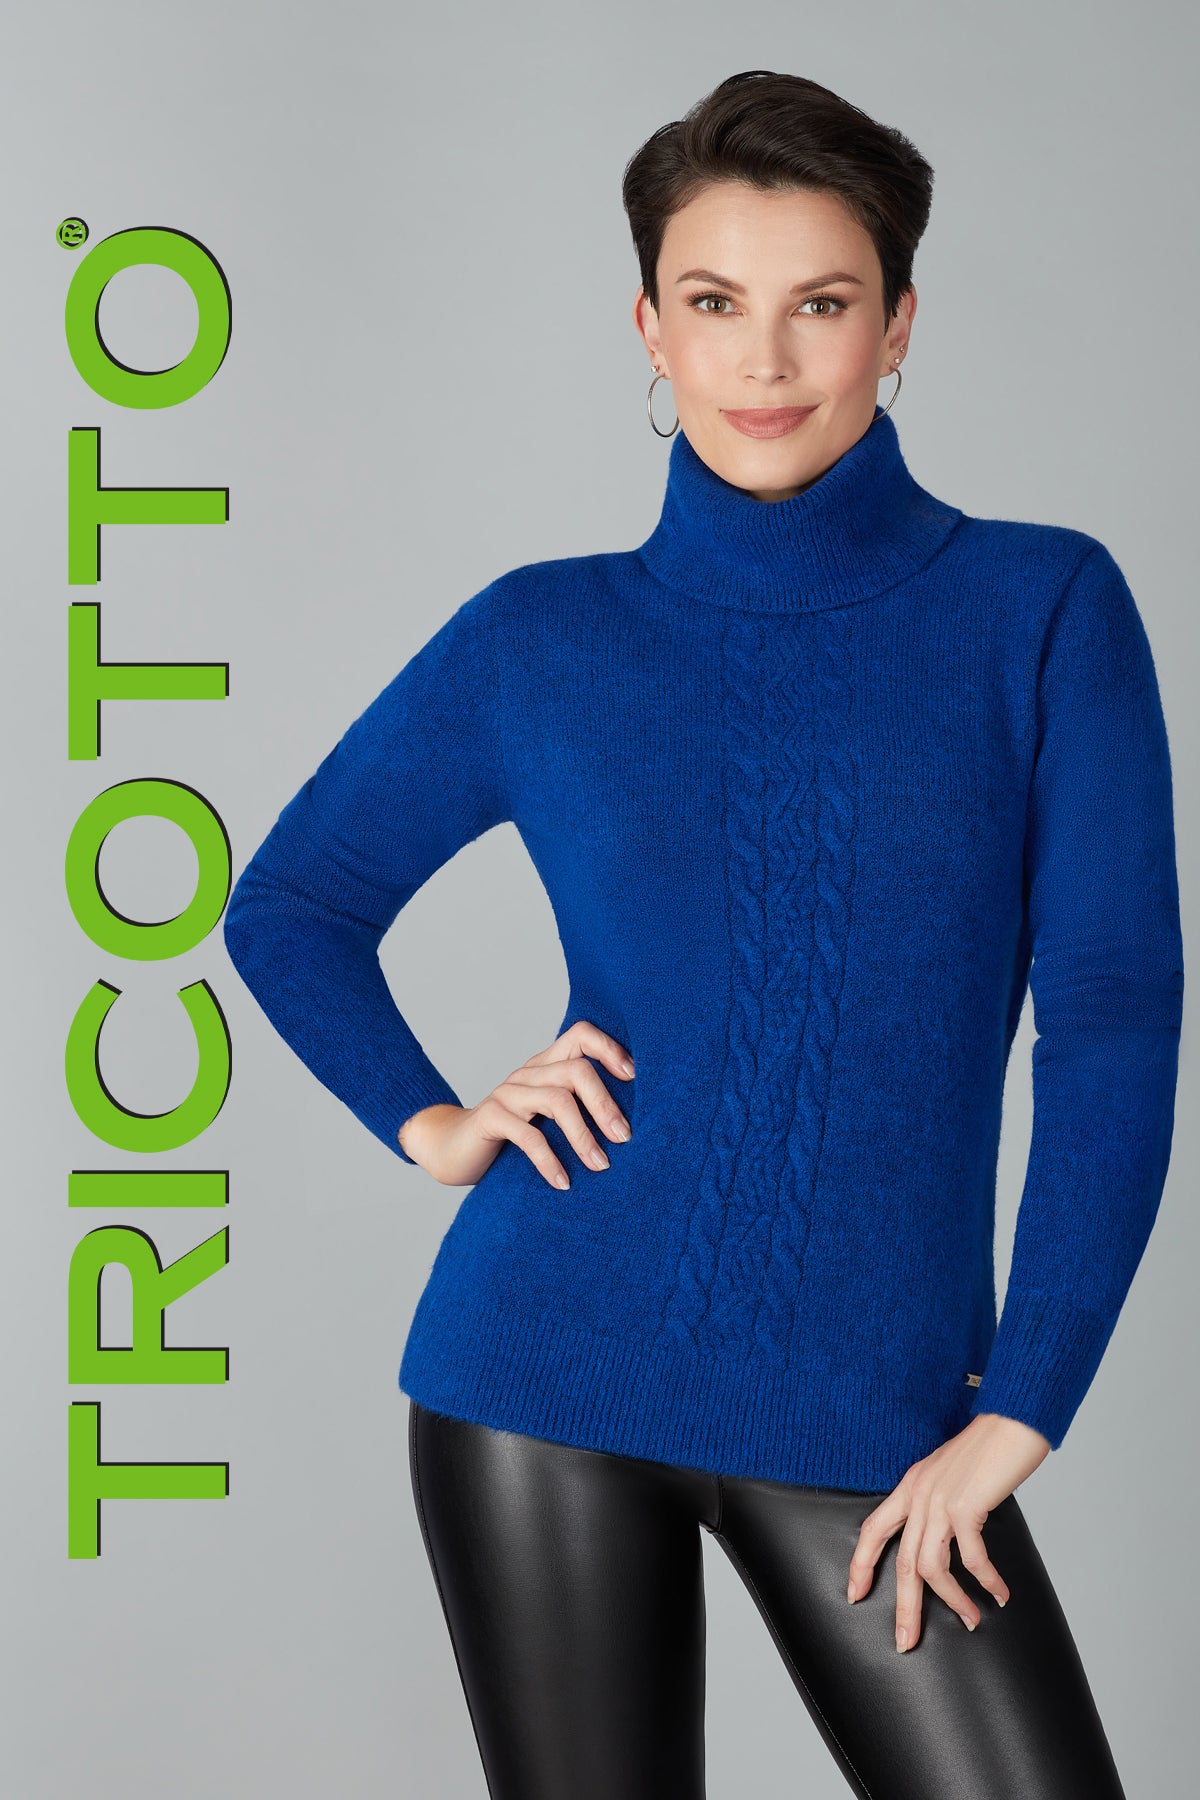 Tricotto Royal Sweater-Tricotto Online Shop-Online Sweater Shop-Tricotto Clothing Montreal